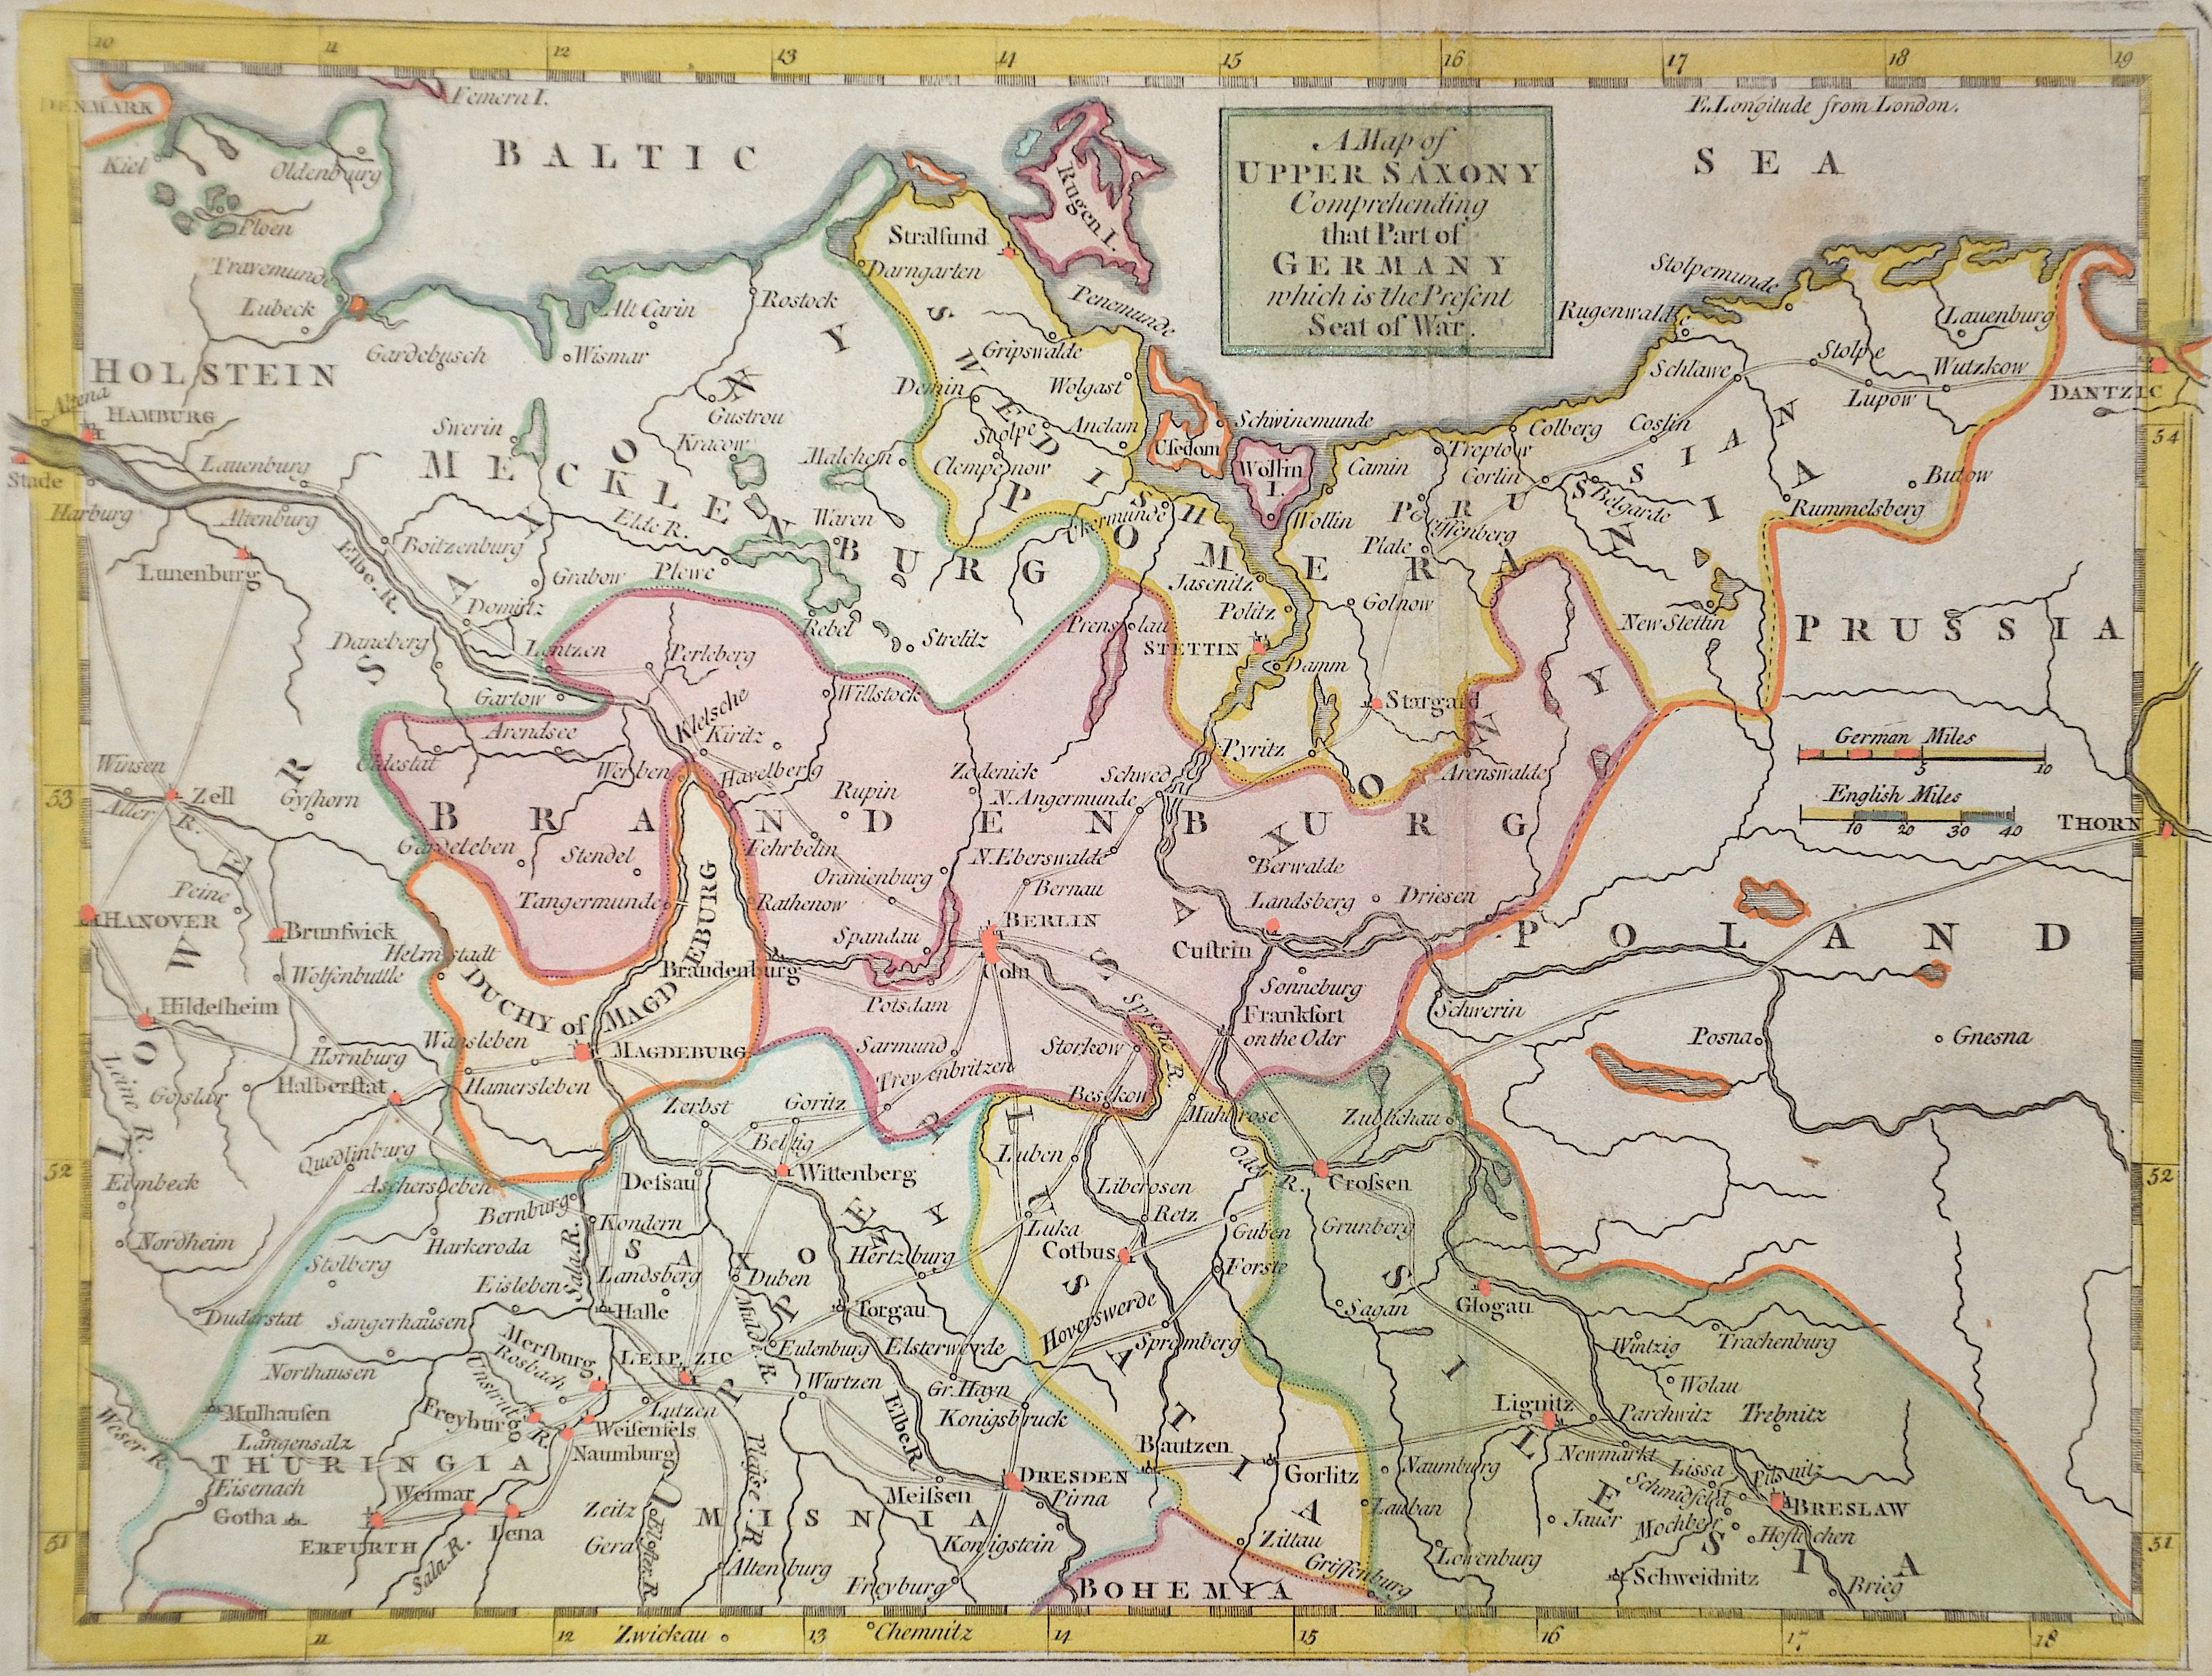 Anonymus  A Map of Upper Saxony Comprehending that Part of Germany which is the Present Seat of War.